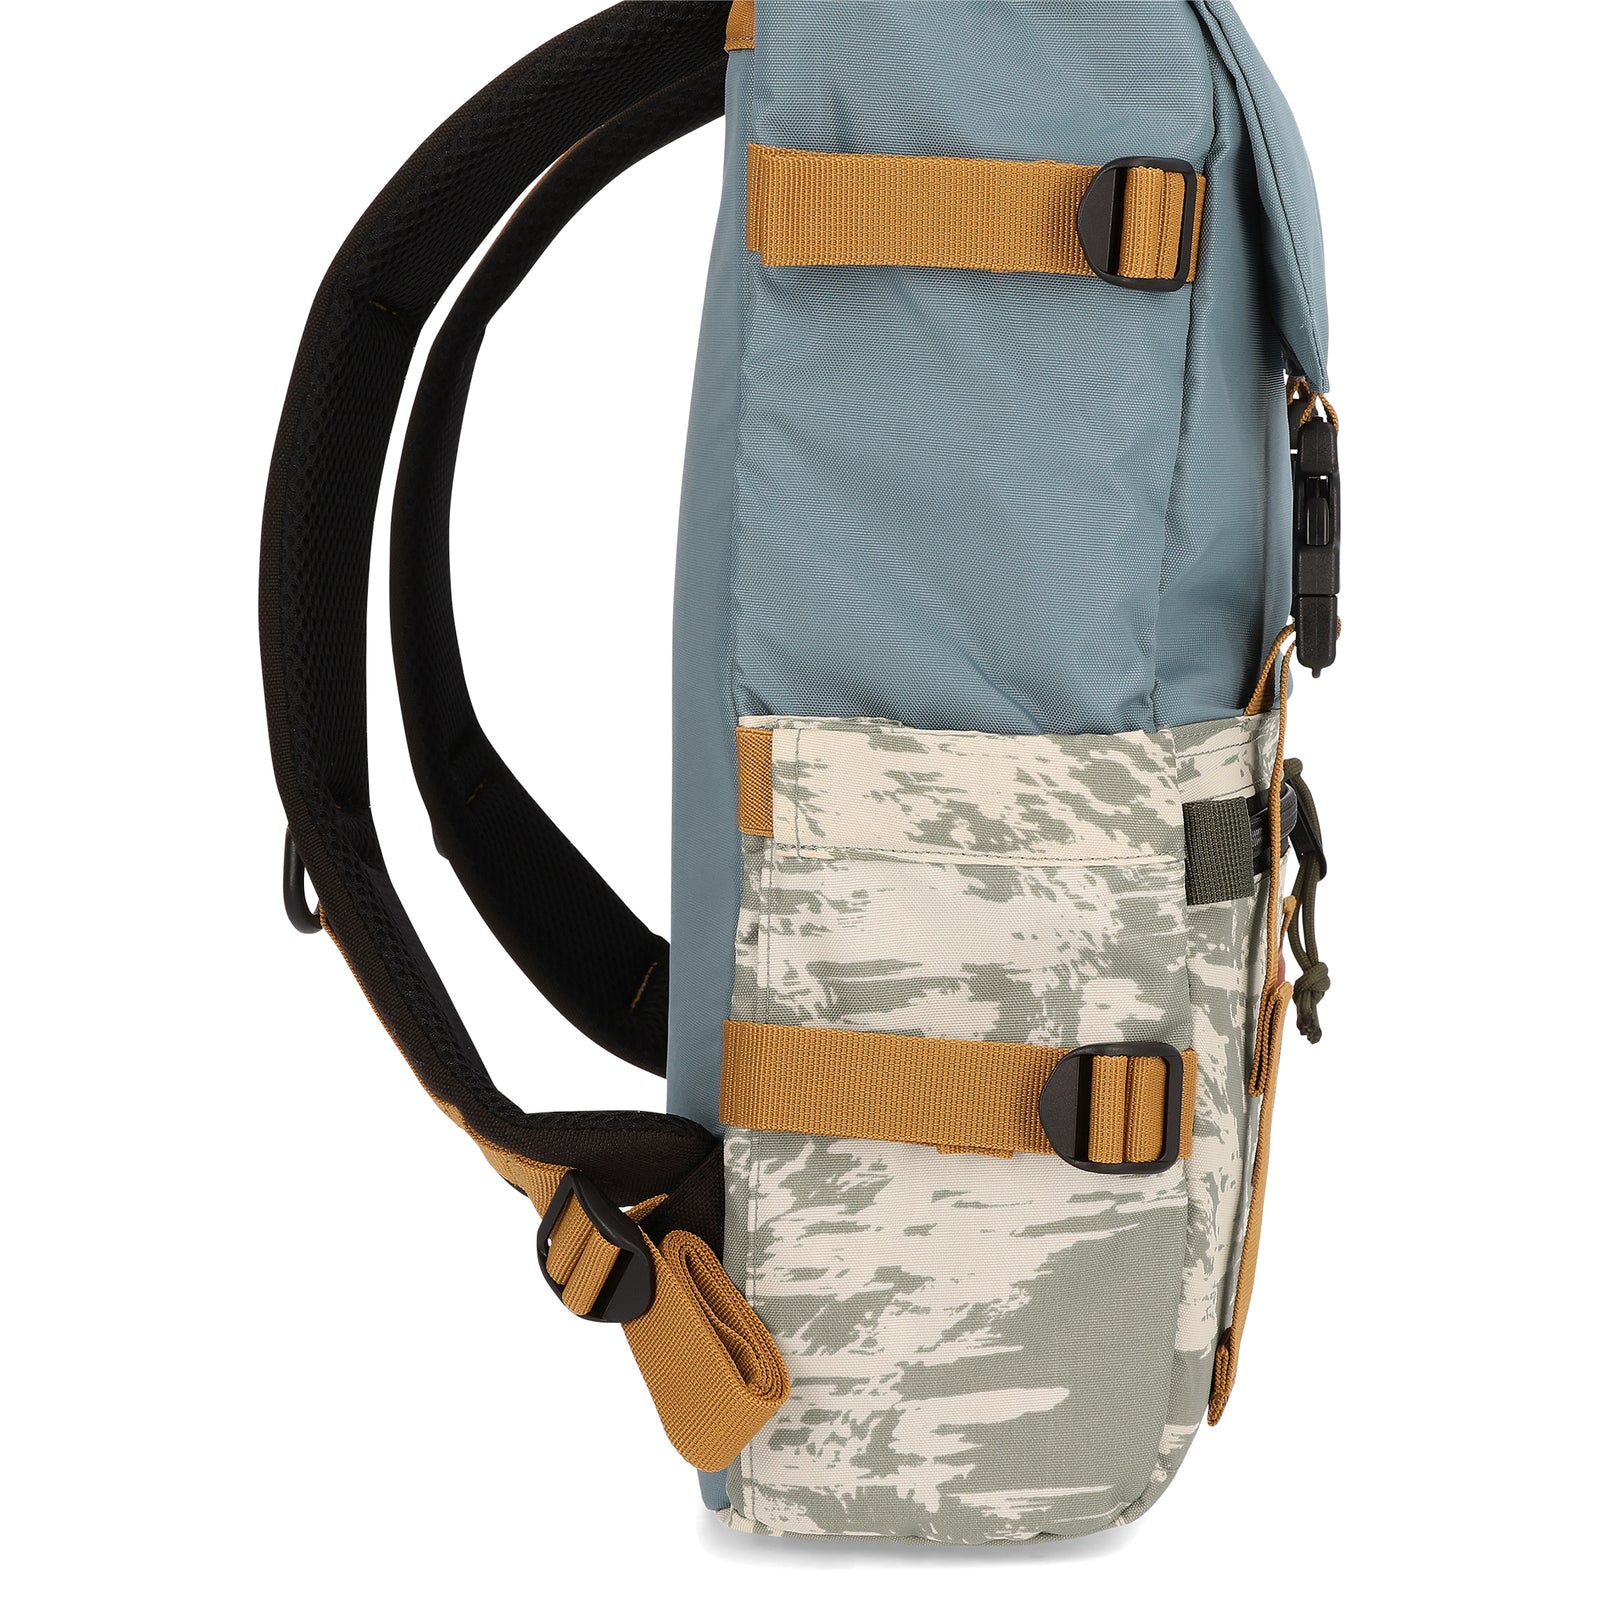 Topo Designs Rover Pack Classic laptop backpack in "Goblin Blue / Sand Multi".